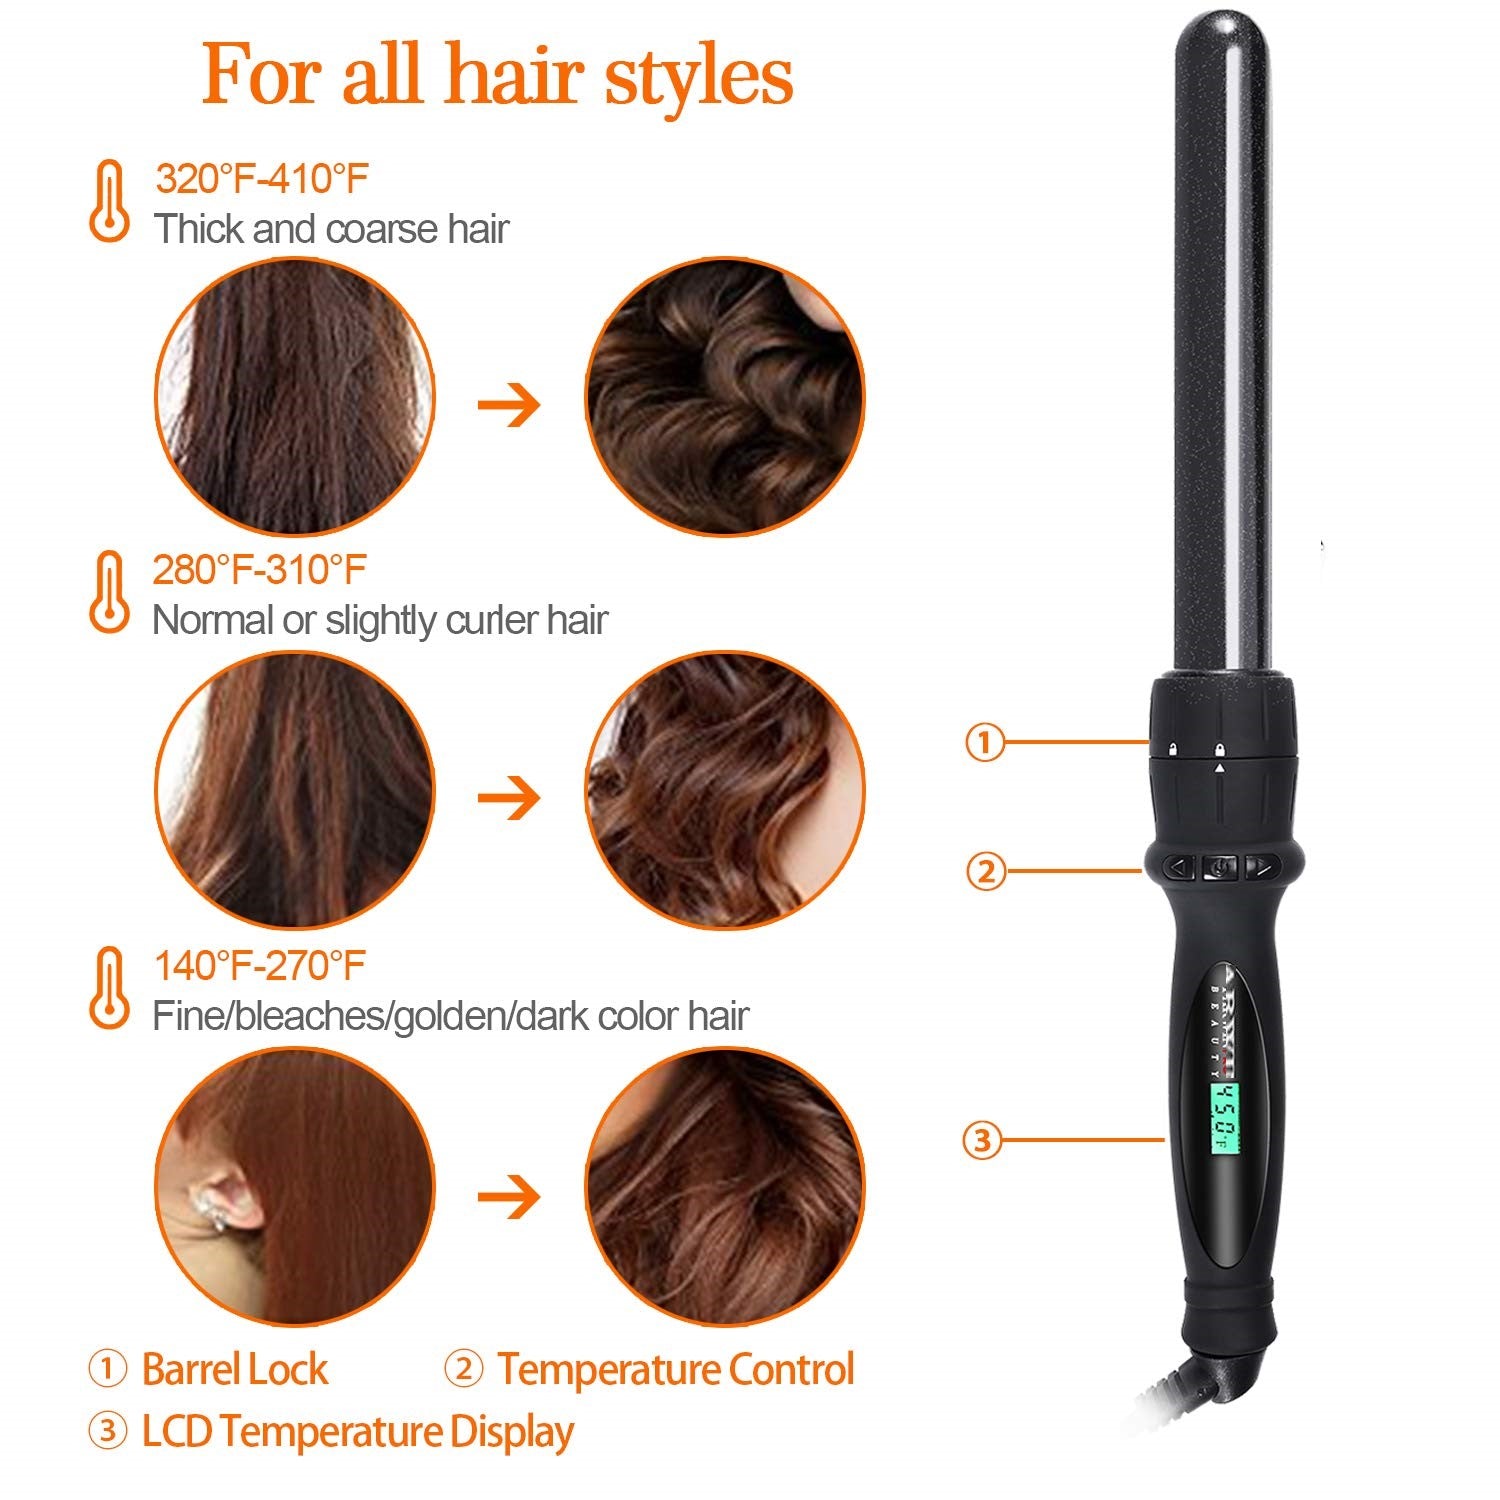 7 in 1 Curling iron set with interchangable barrles Ceramic Curling Iron Set